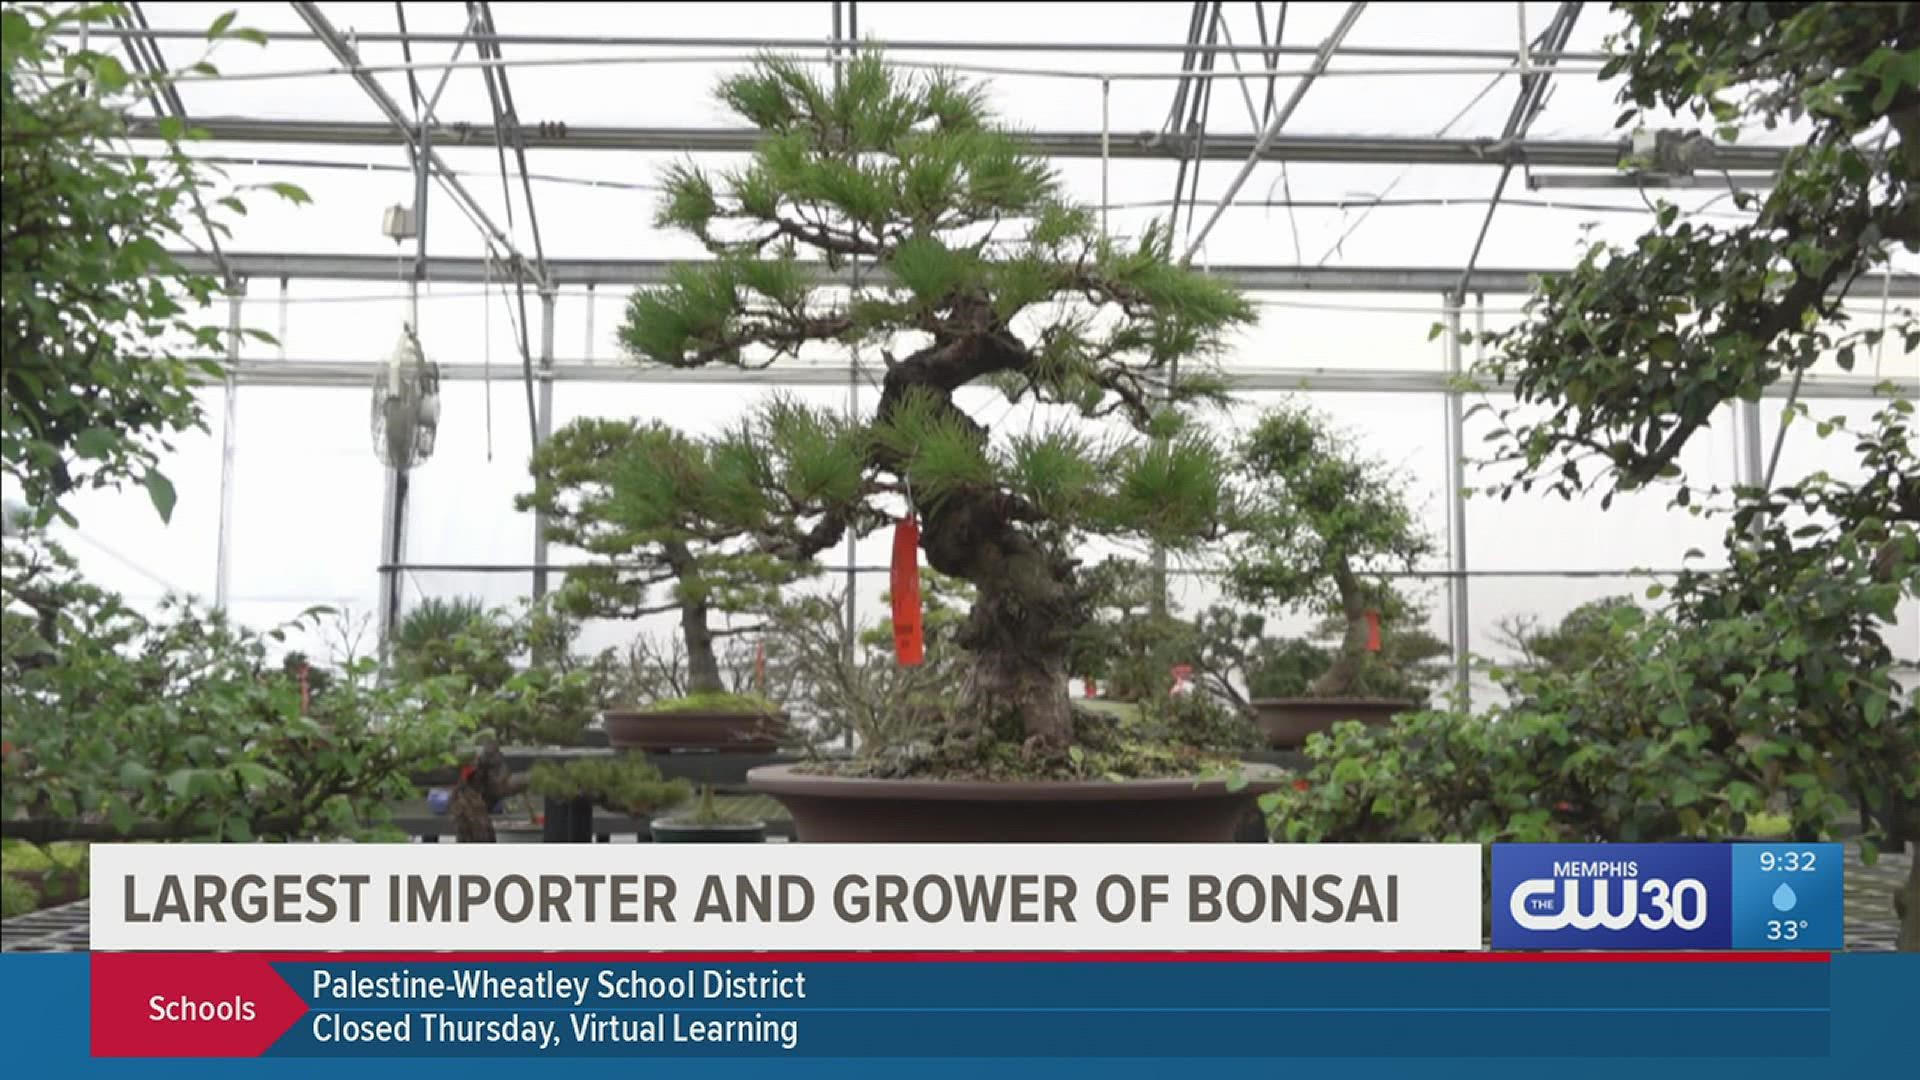 Their history started in Japan, but much of their present success is due to a nursery in DeSoto County.